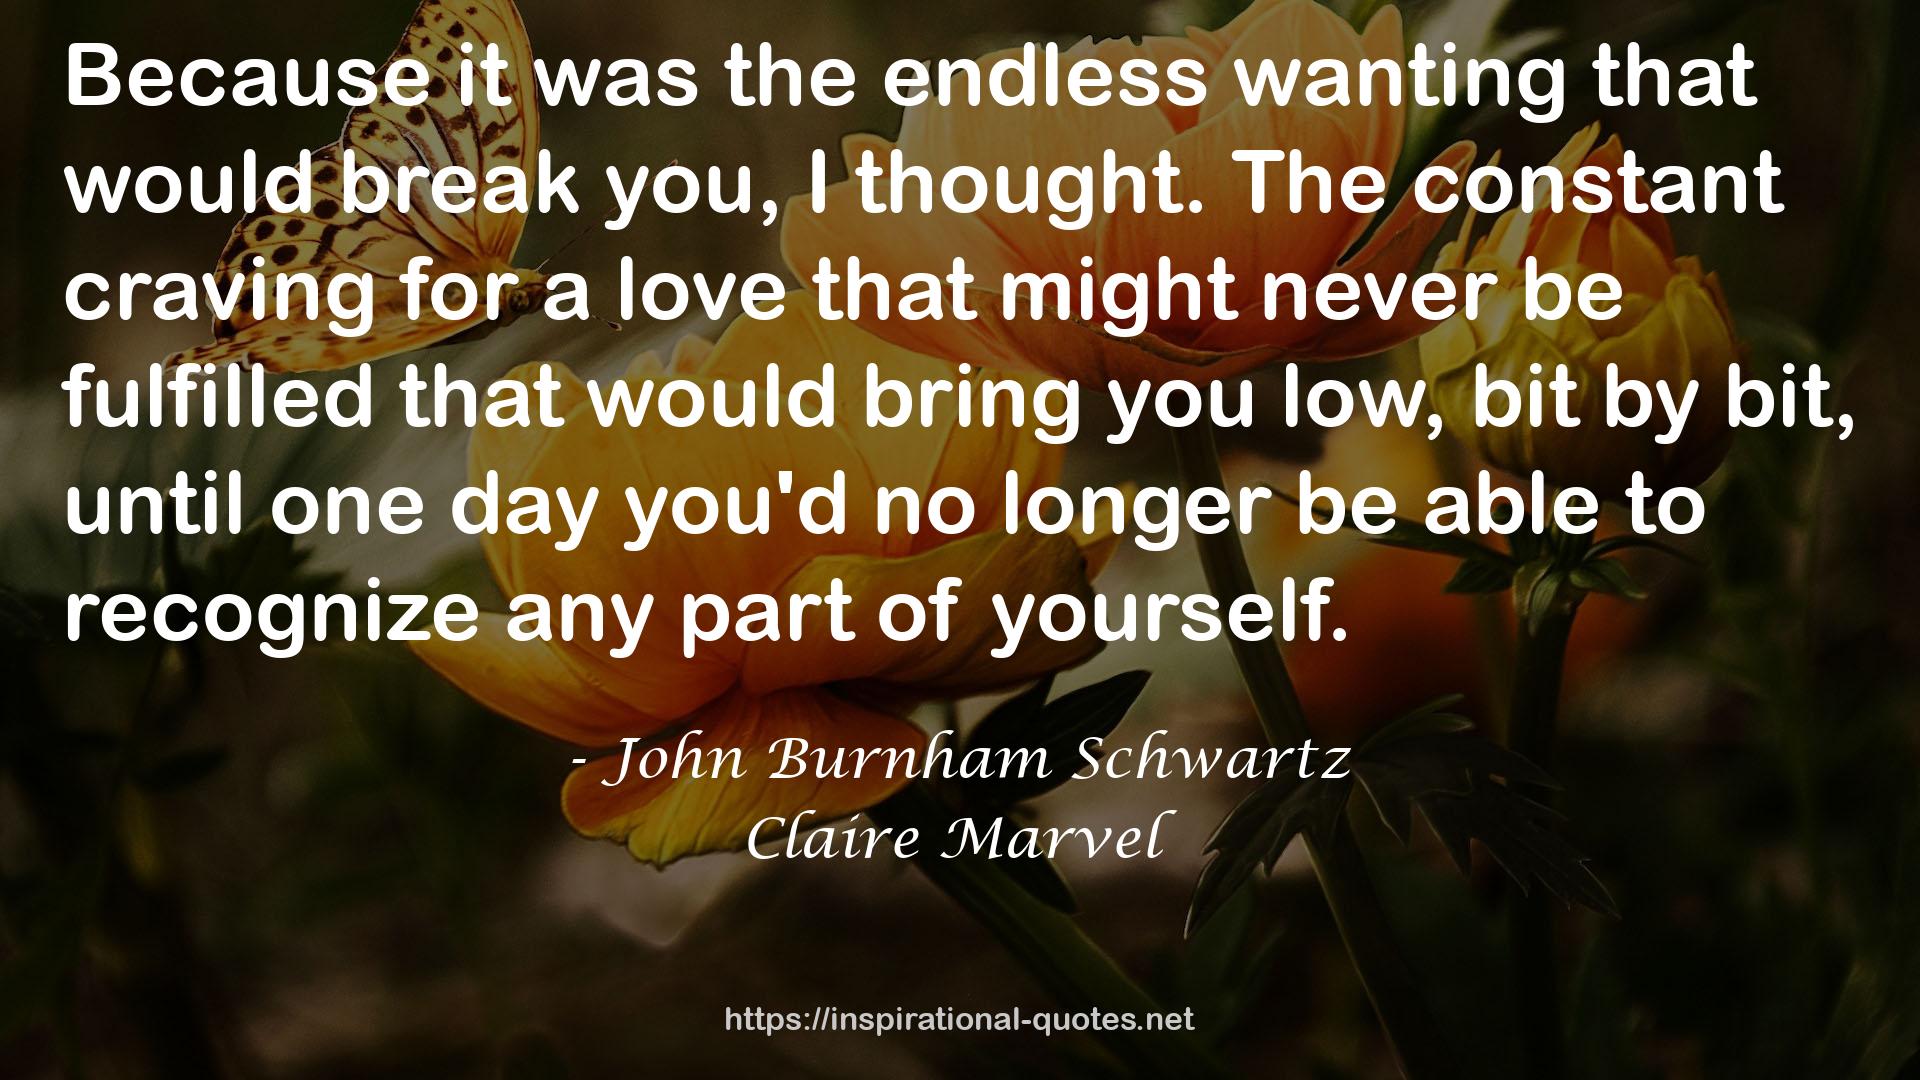 Claire Marvel QUOTES